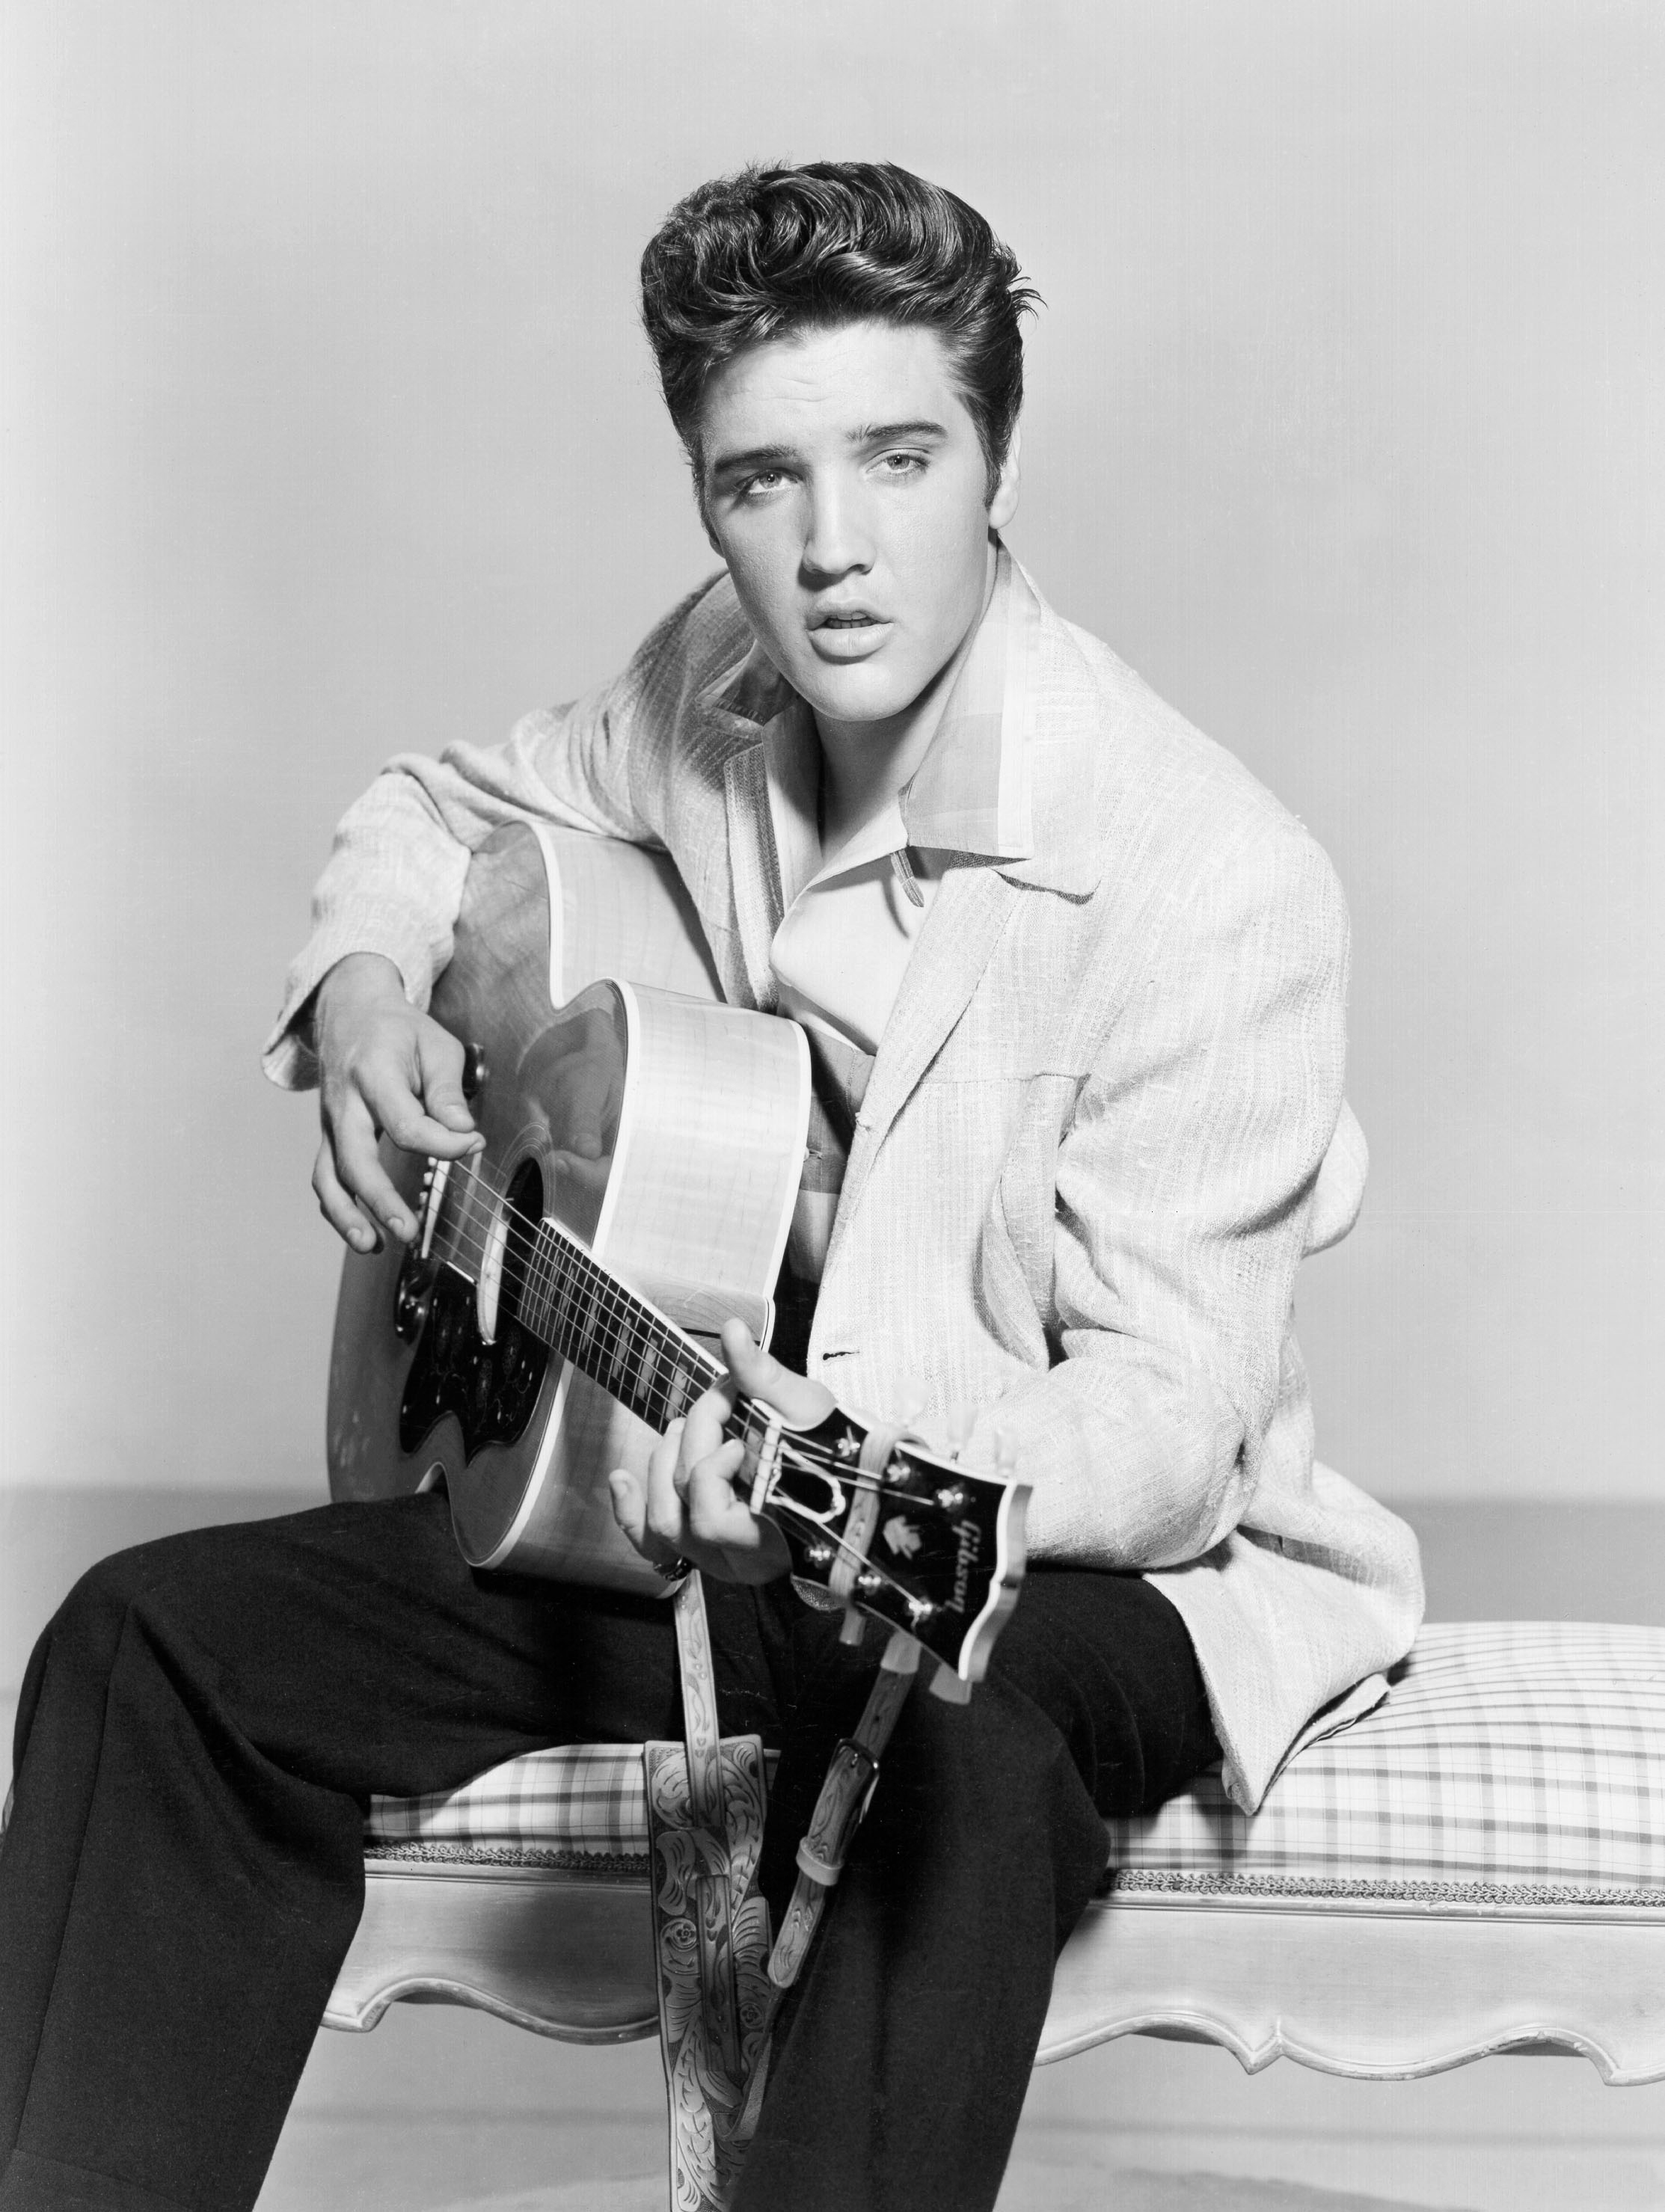 Details of Elvis Presley's Intimate Relationships Revealed in New Book ...